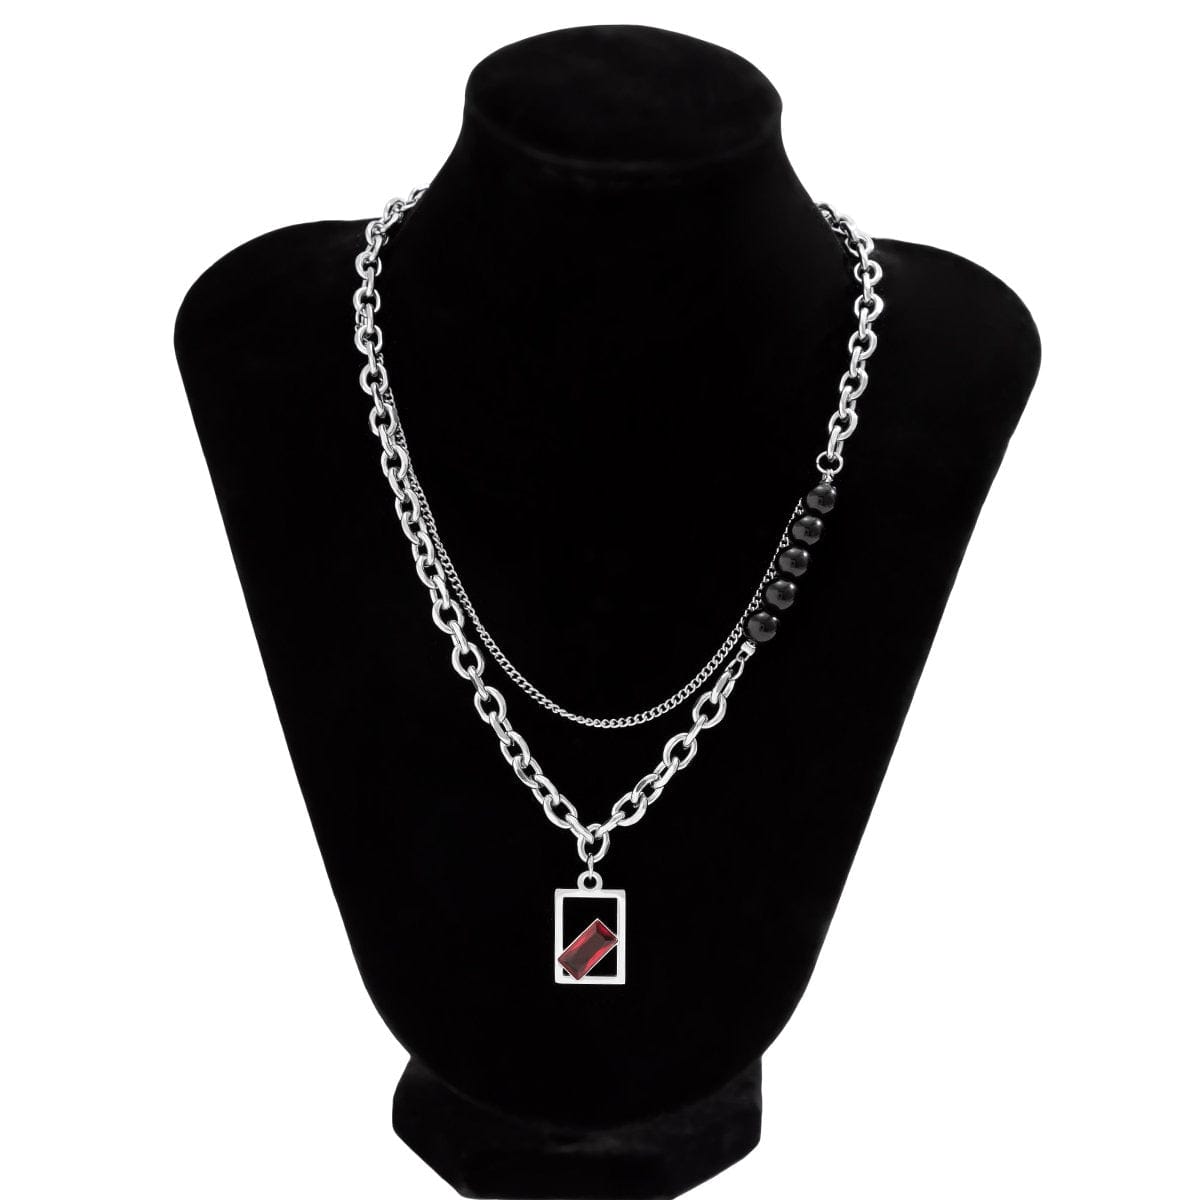 Stainless Steel Rhinestone Inlaid Square Pendant Ball Charm Curb Cable Chain Necklace - ArtGalleryZen